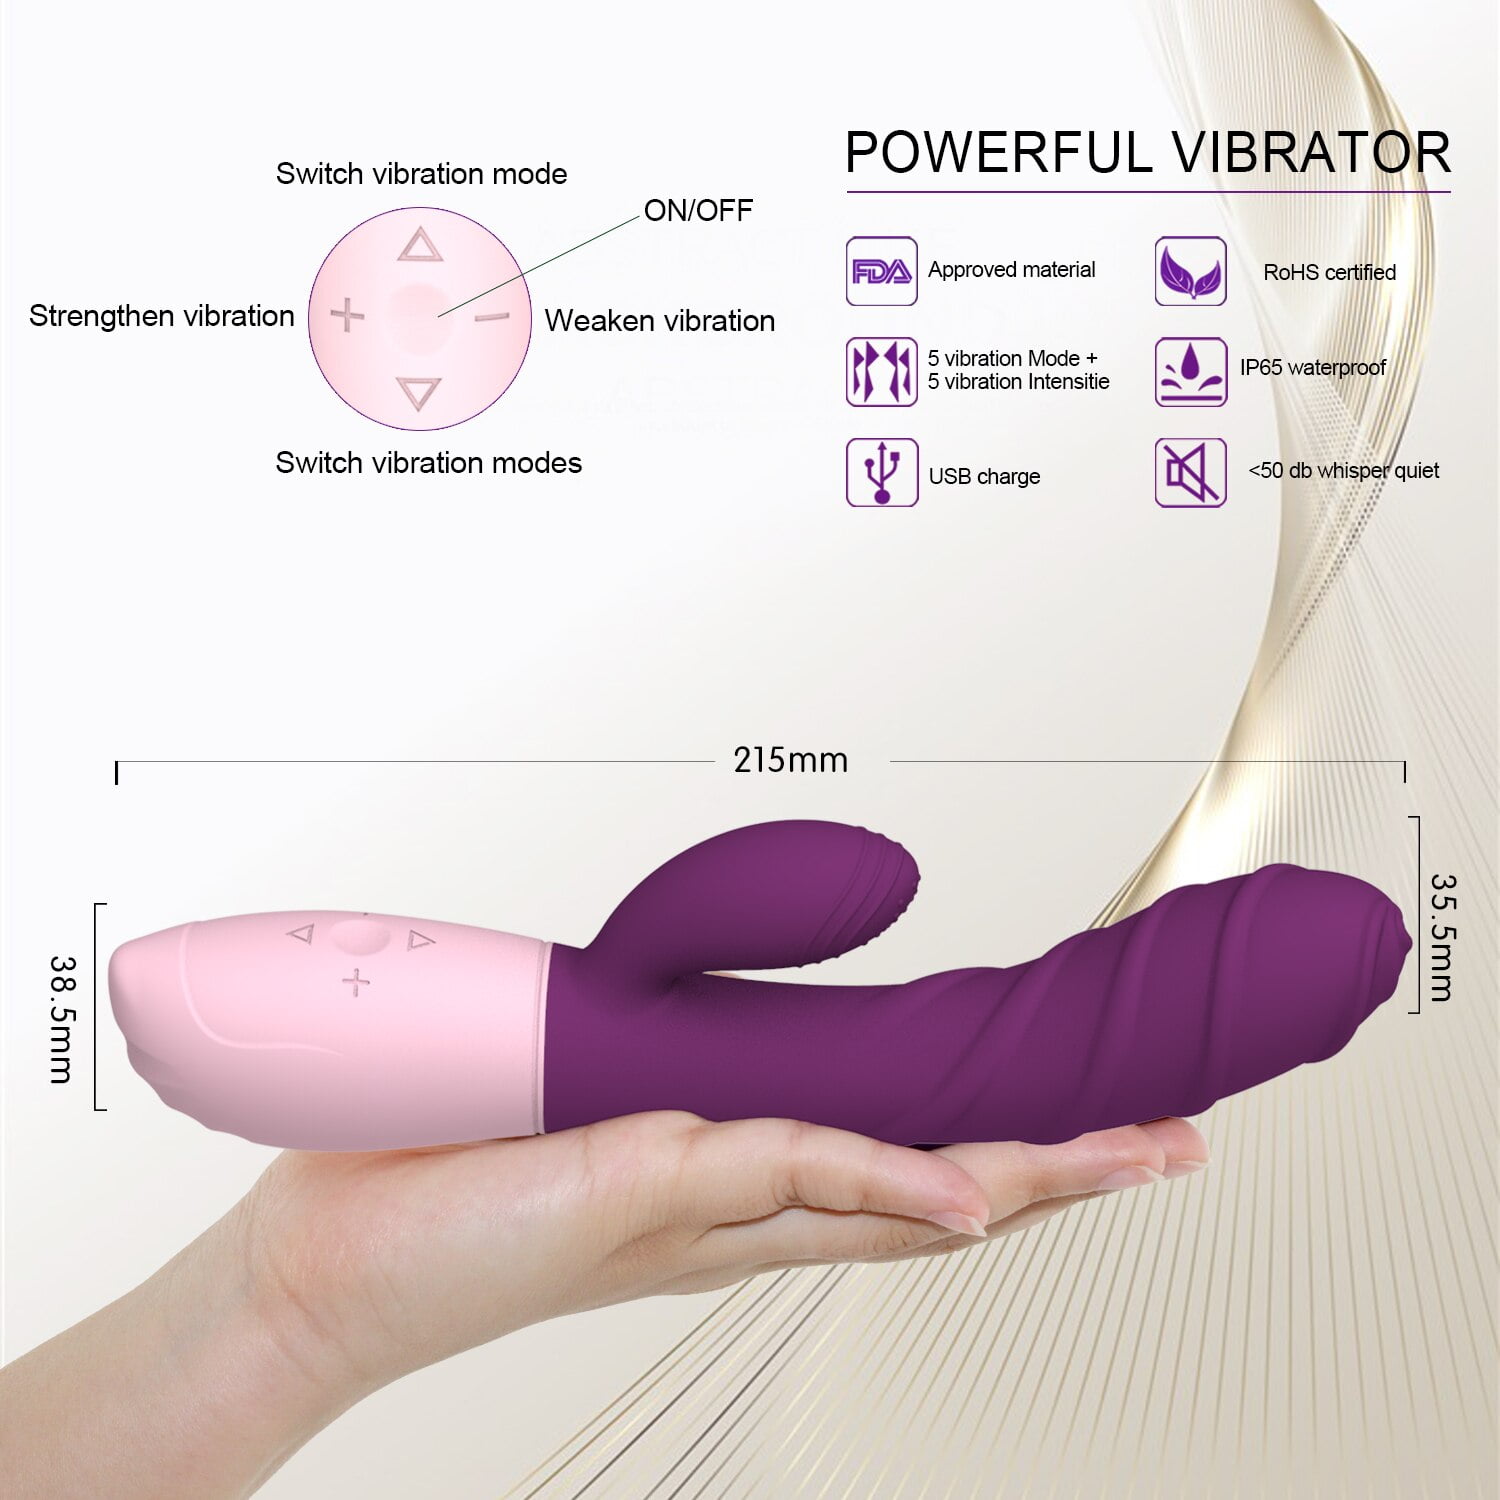 Female Most Powerful Rabbit Vibrator picture